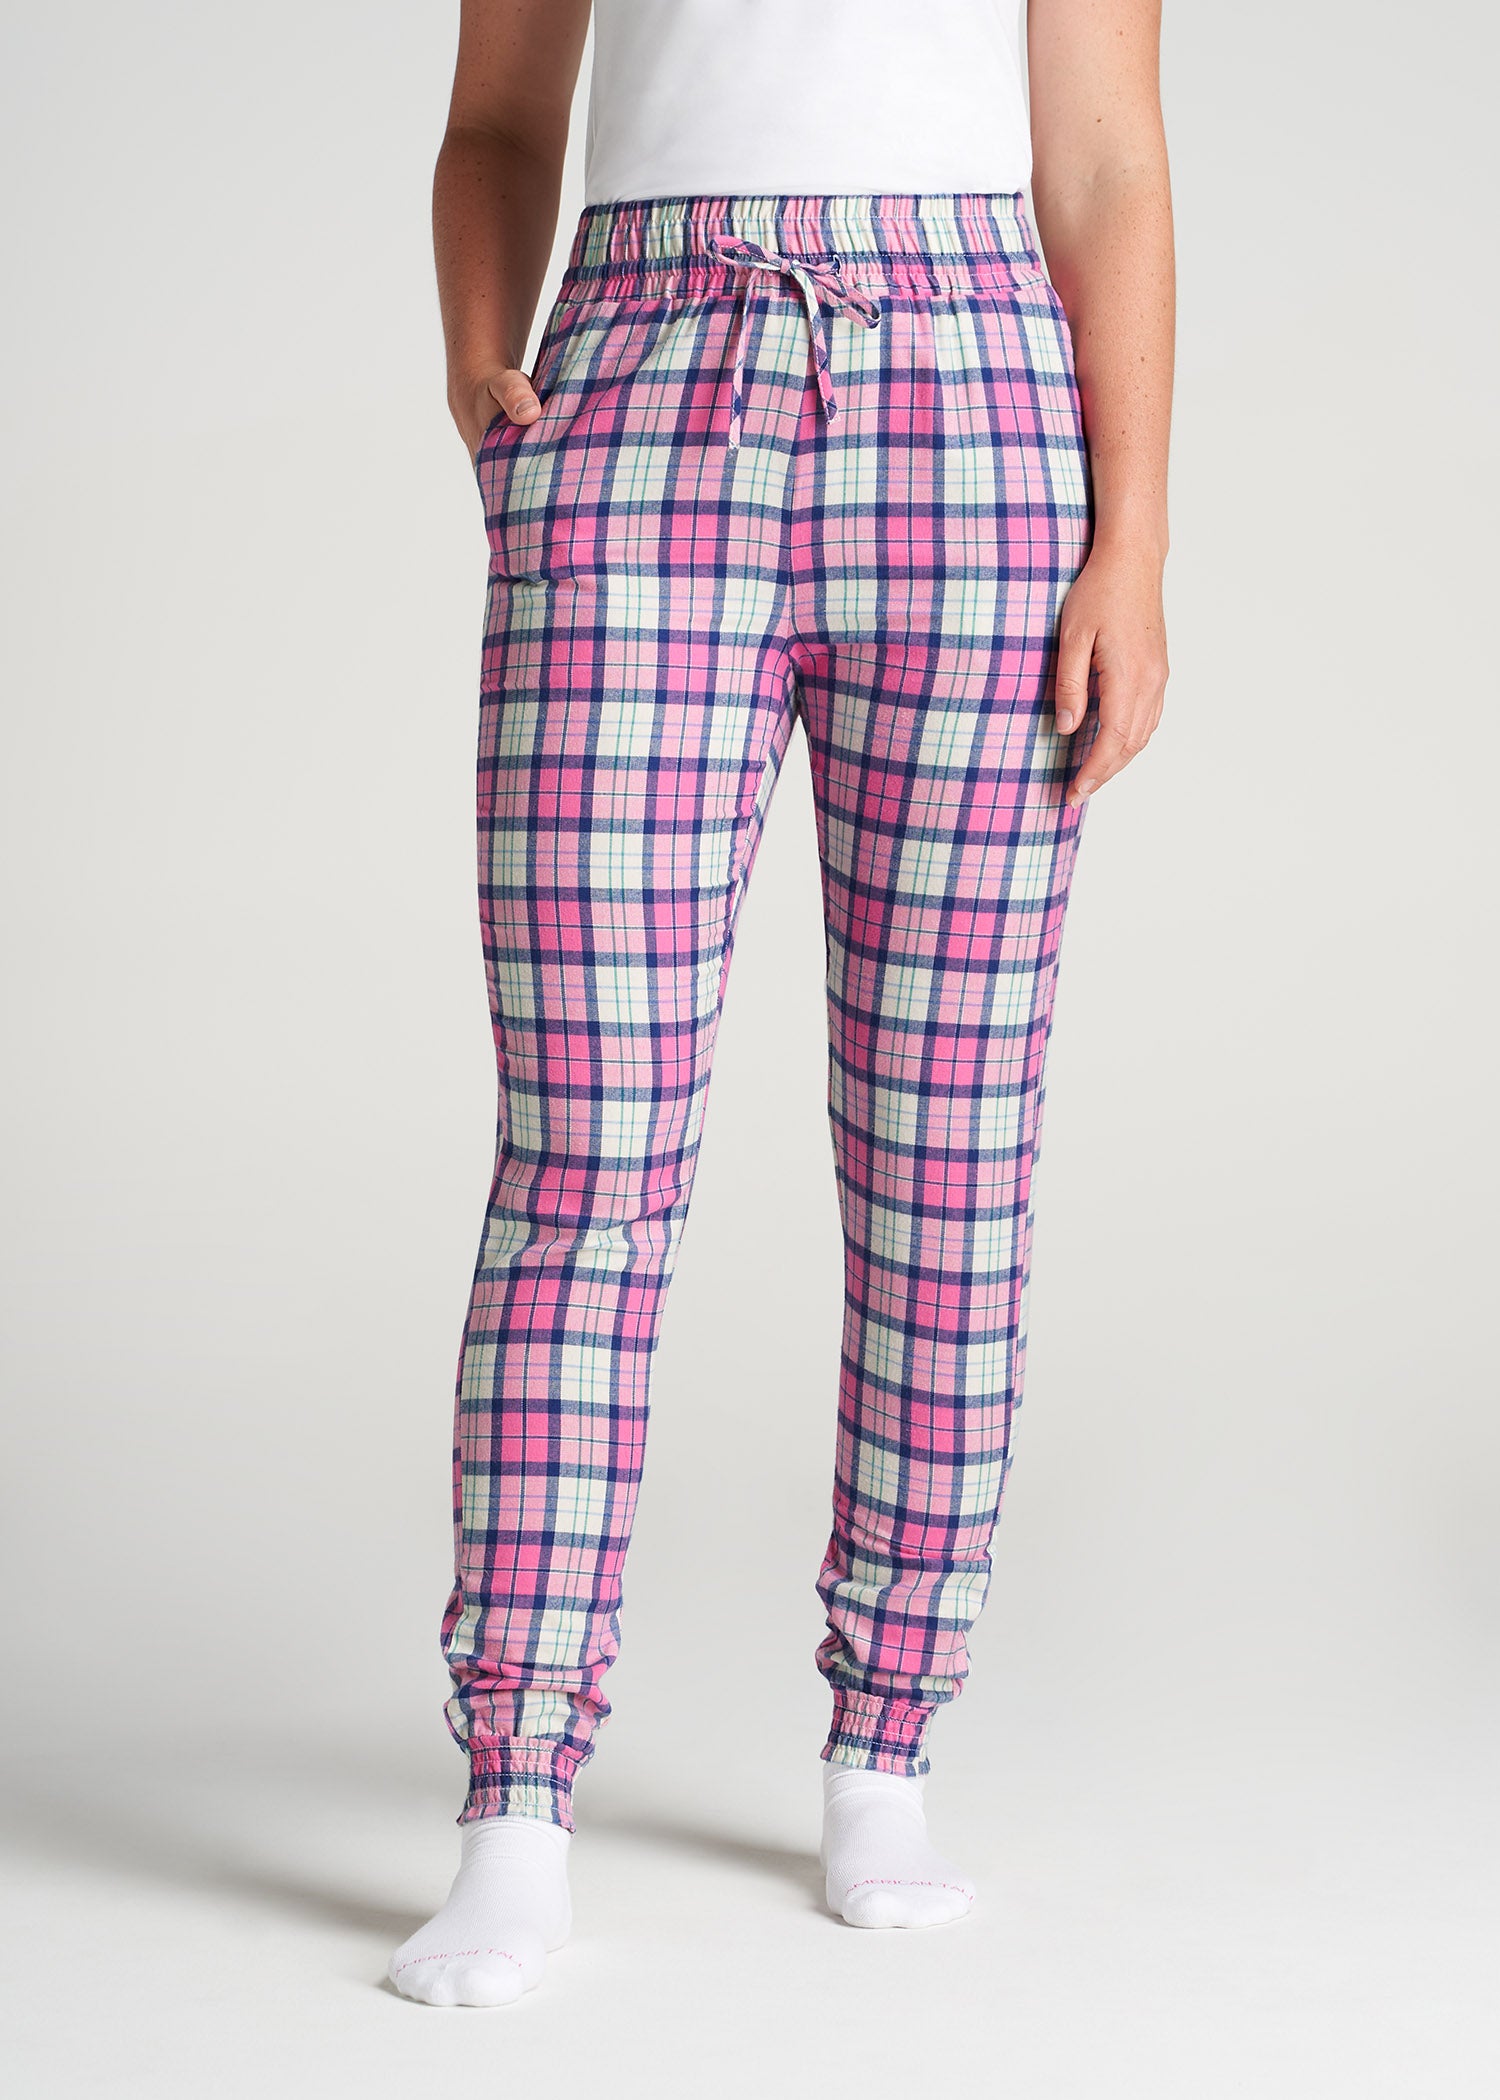 Flannel Women's Tall Pajama Pants In Pink Plaid, 42% OFF